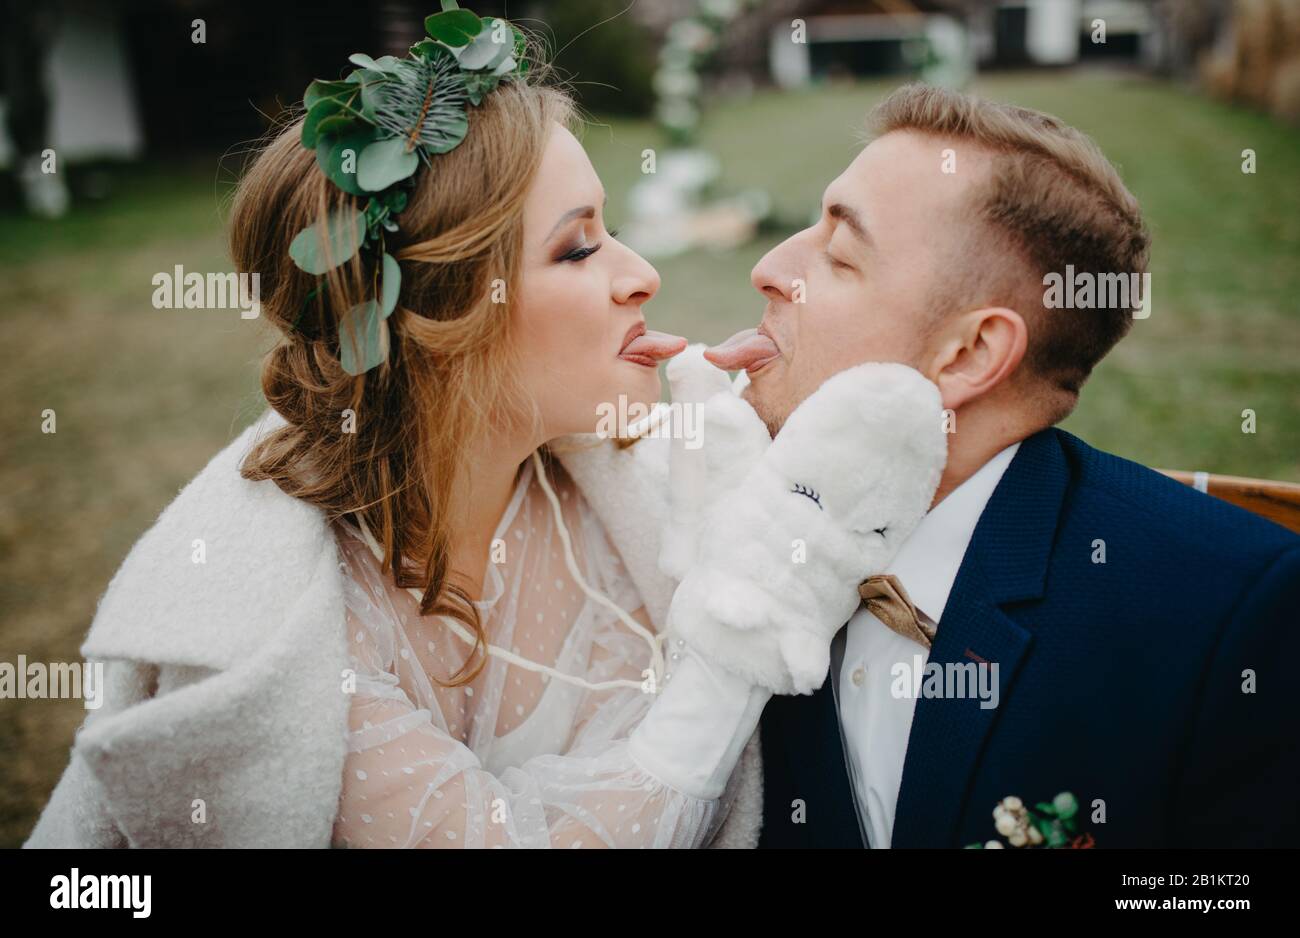 Newlyweds have a fun, frolic and show each other tongue. Closeup. Stock Photo